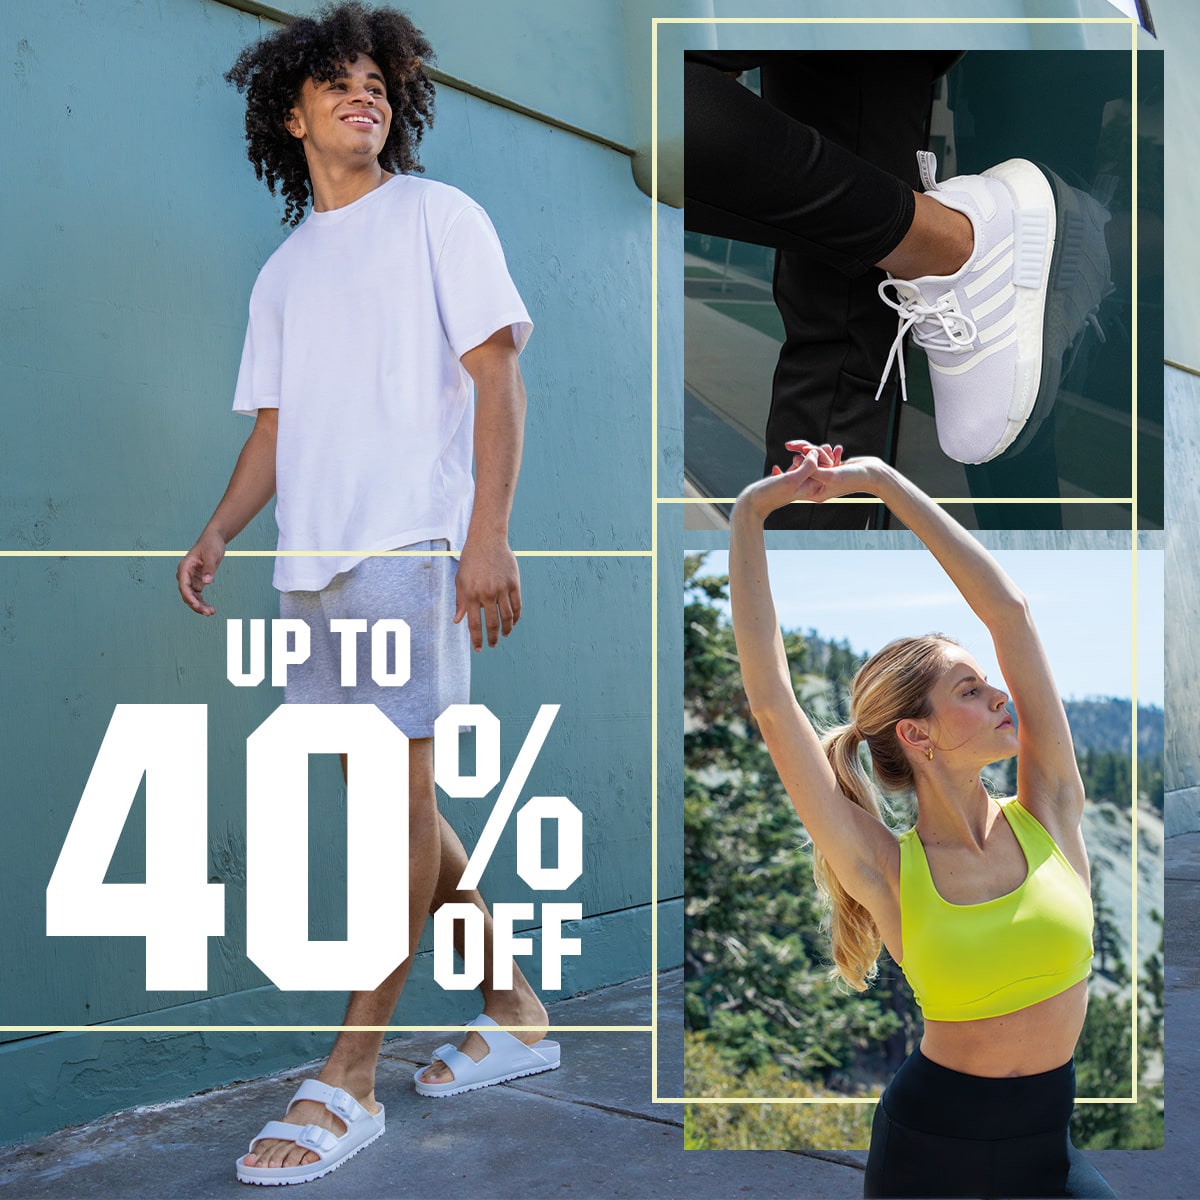 Up to 40% off.